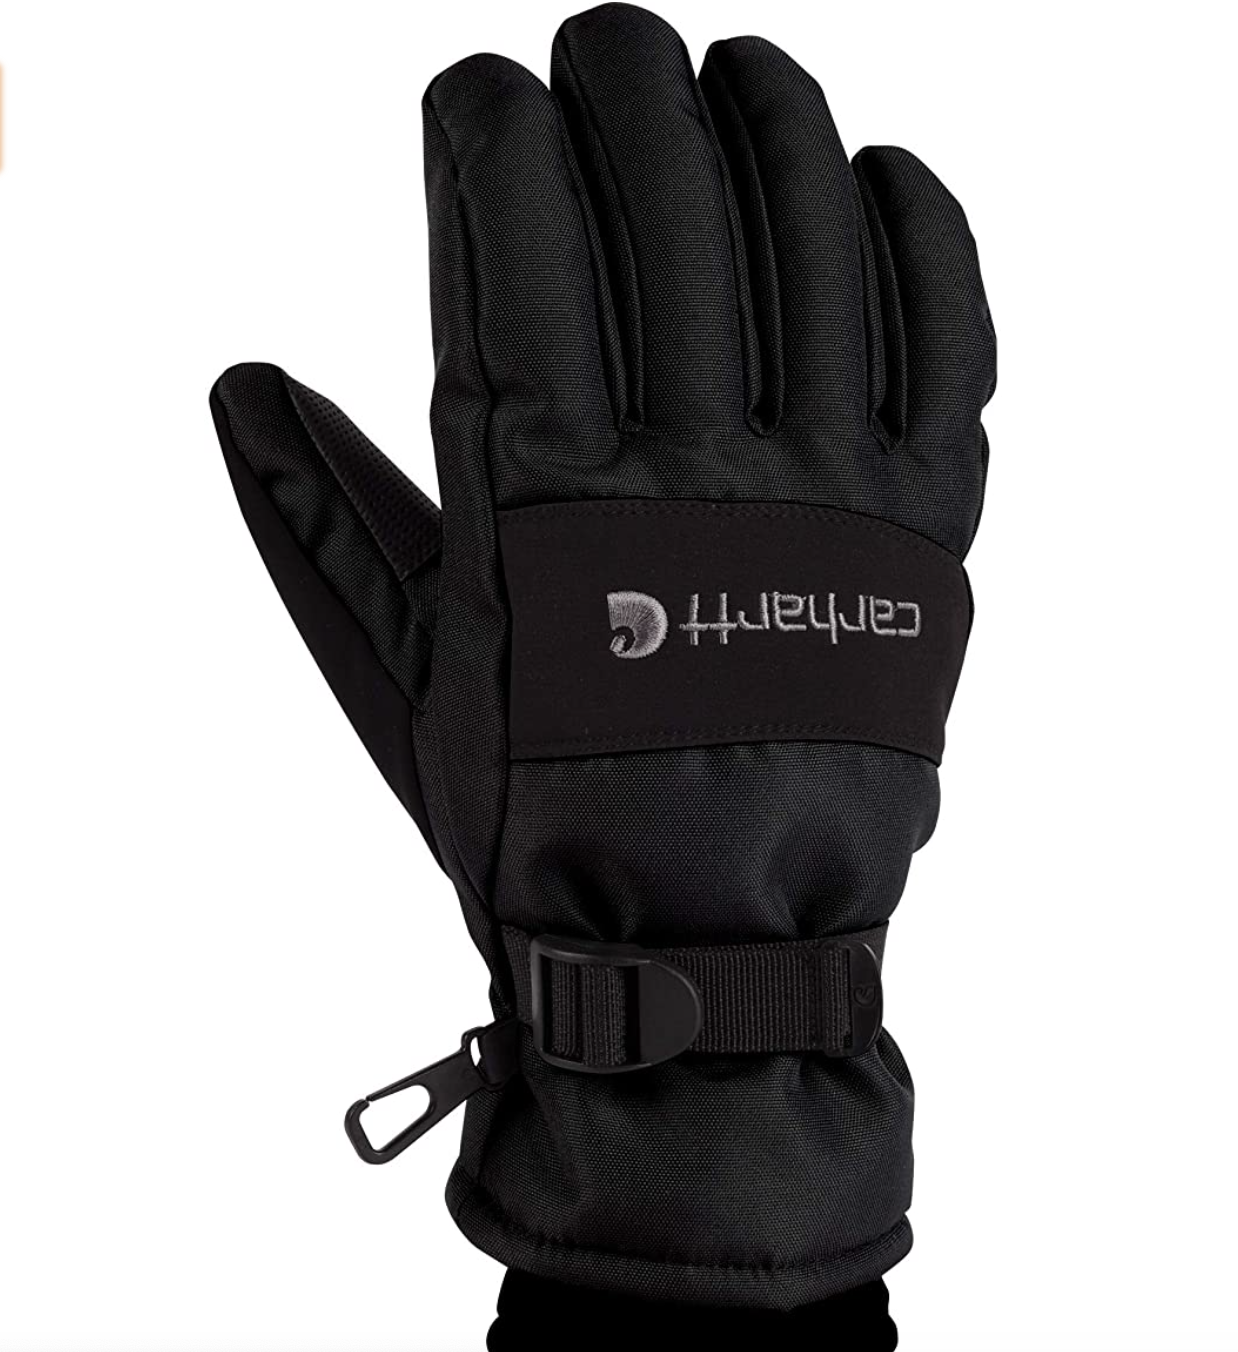 Waterproof Insulated Gloves